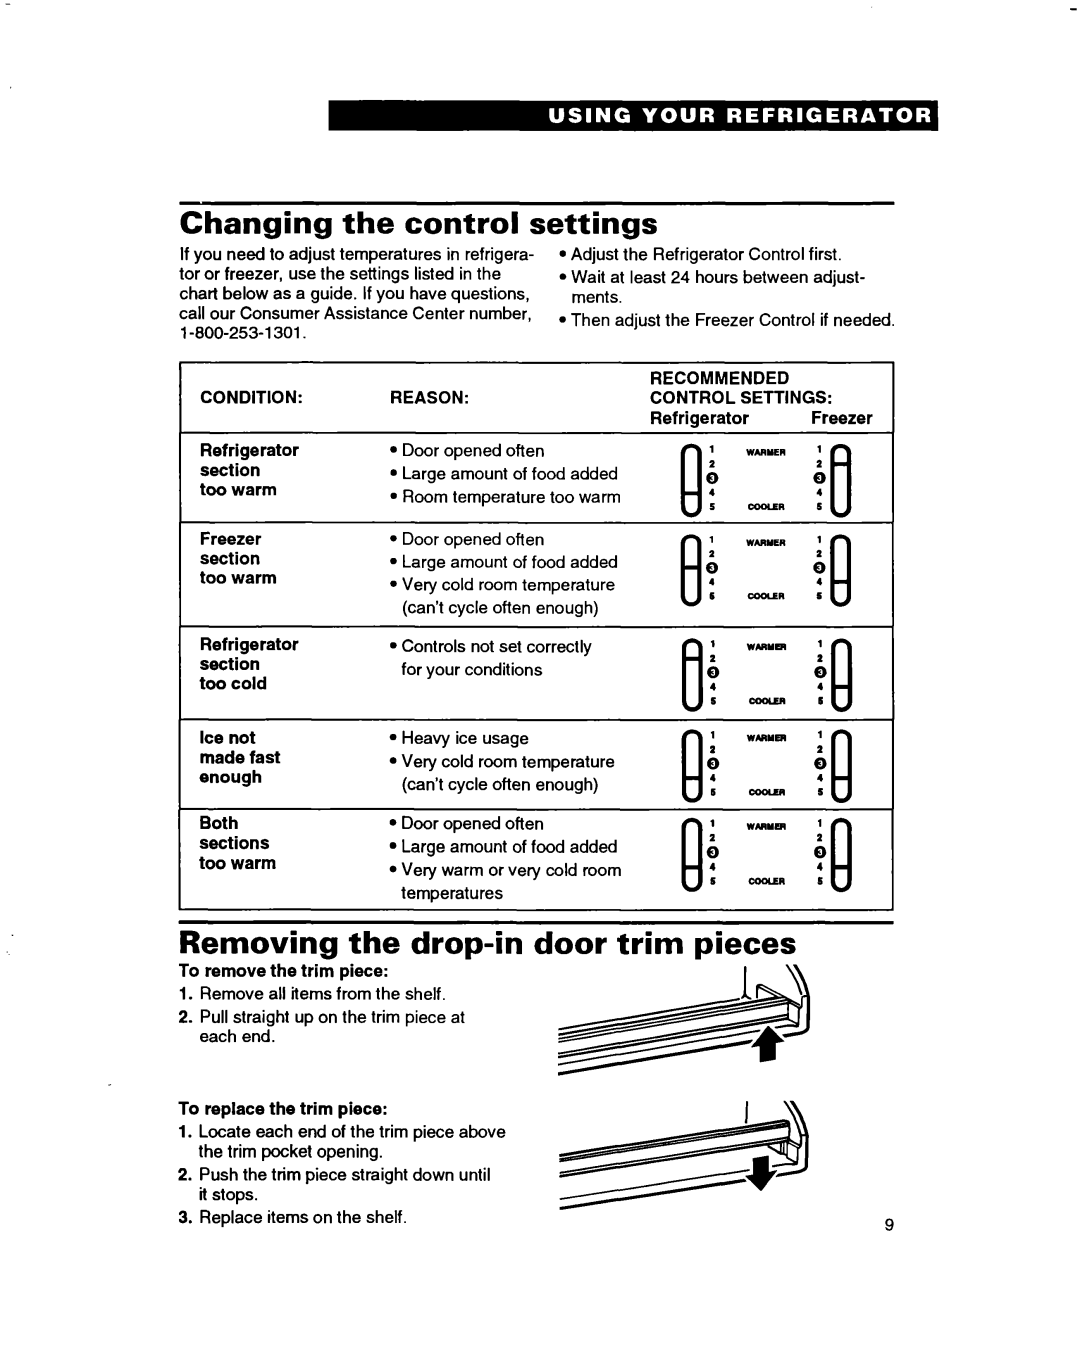 Whirlpool ET14JMXBN00 warranty Changing the control settings, Removing the drop-indoor trim pieces 